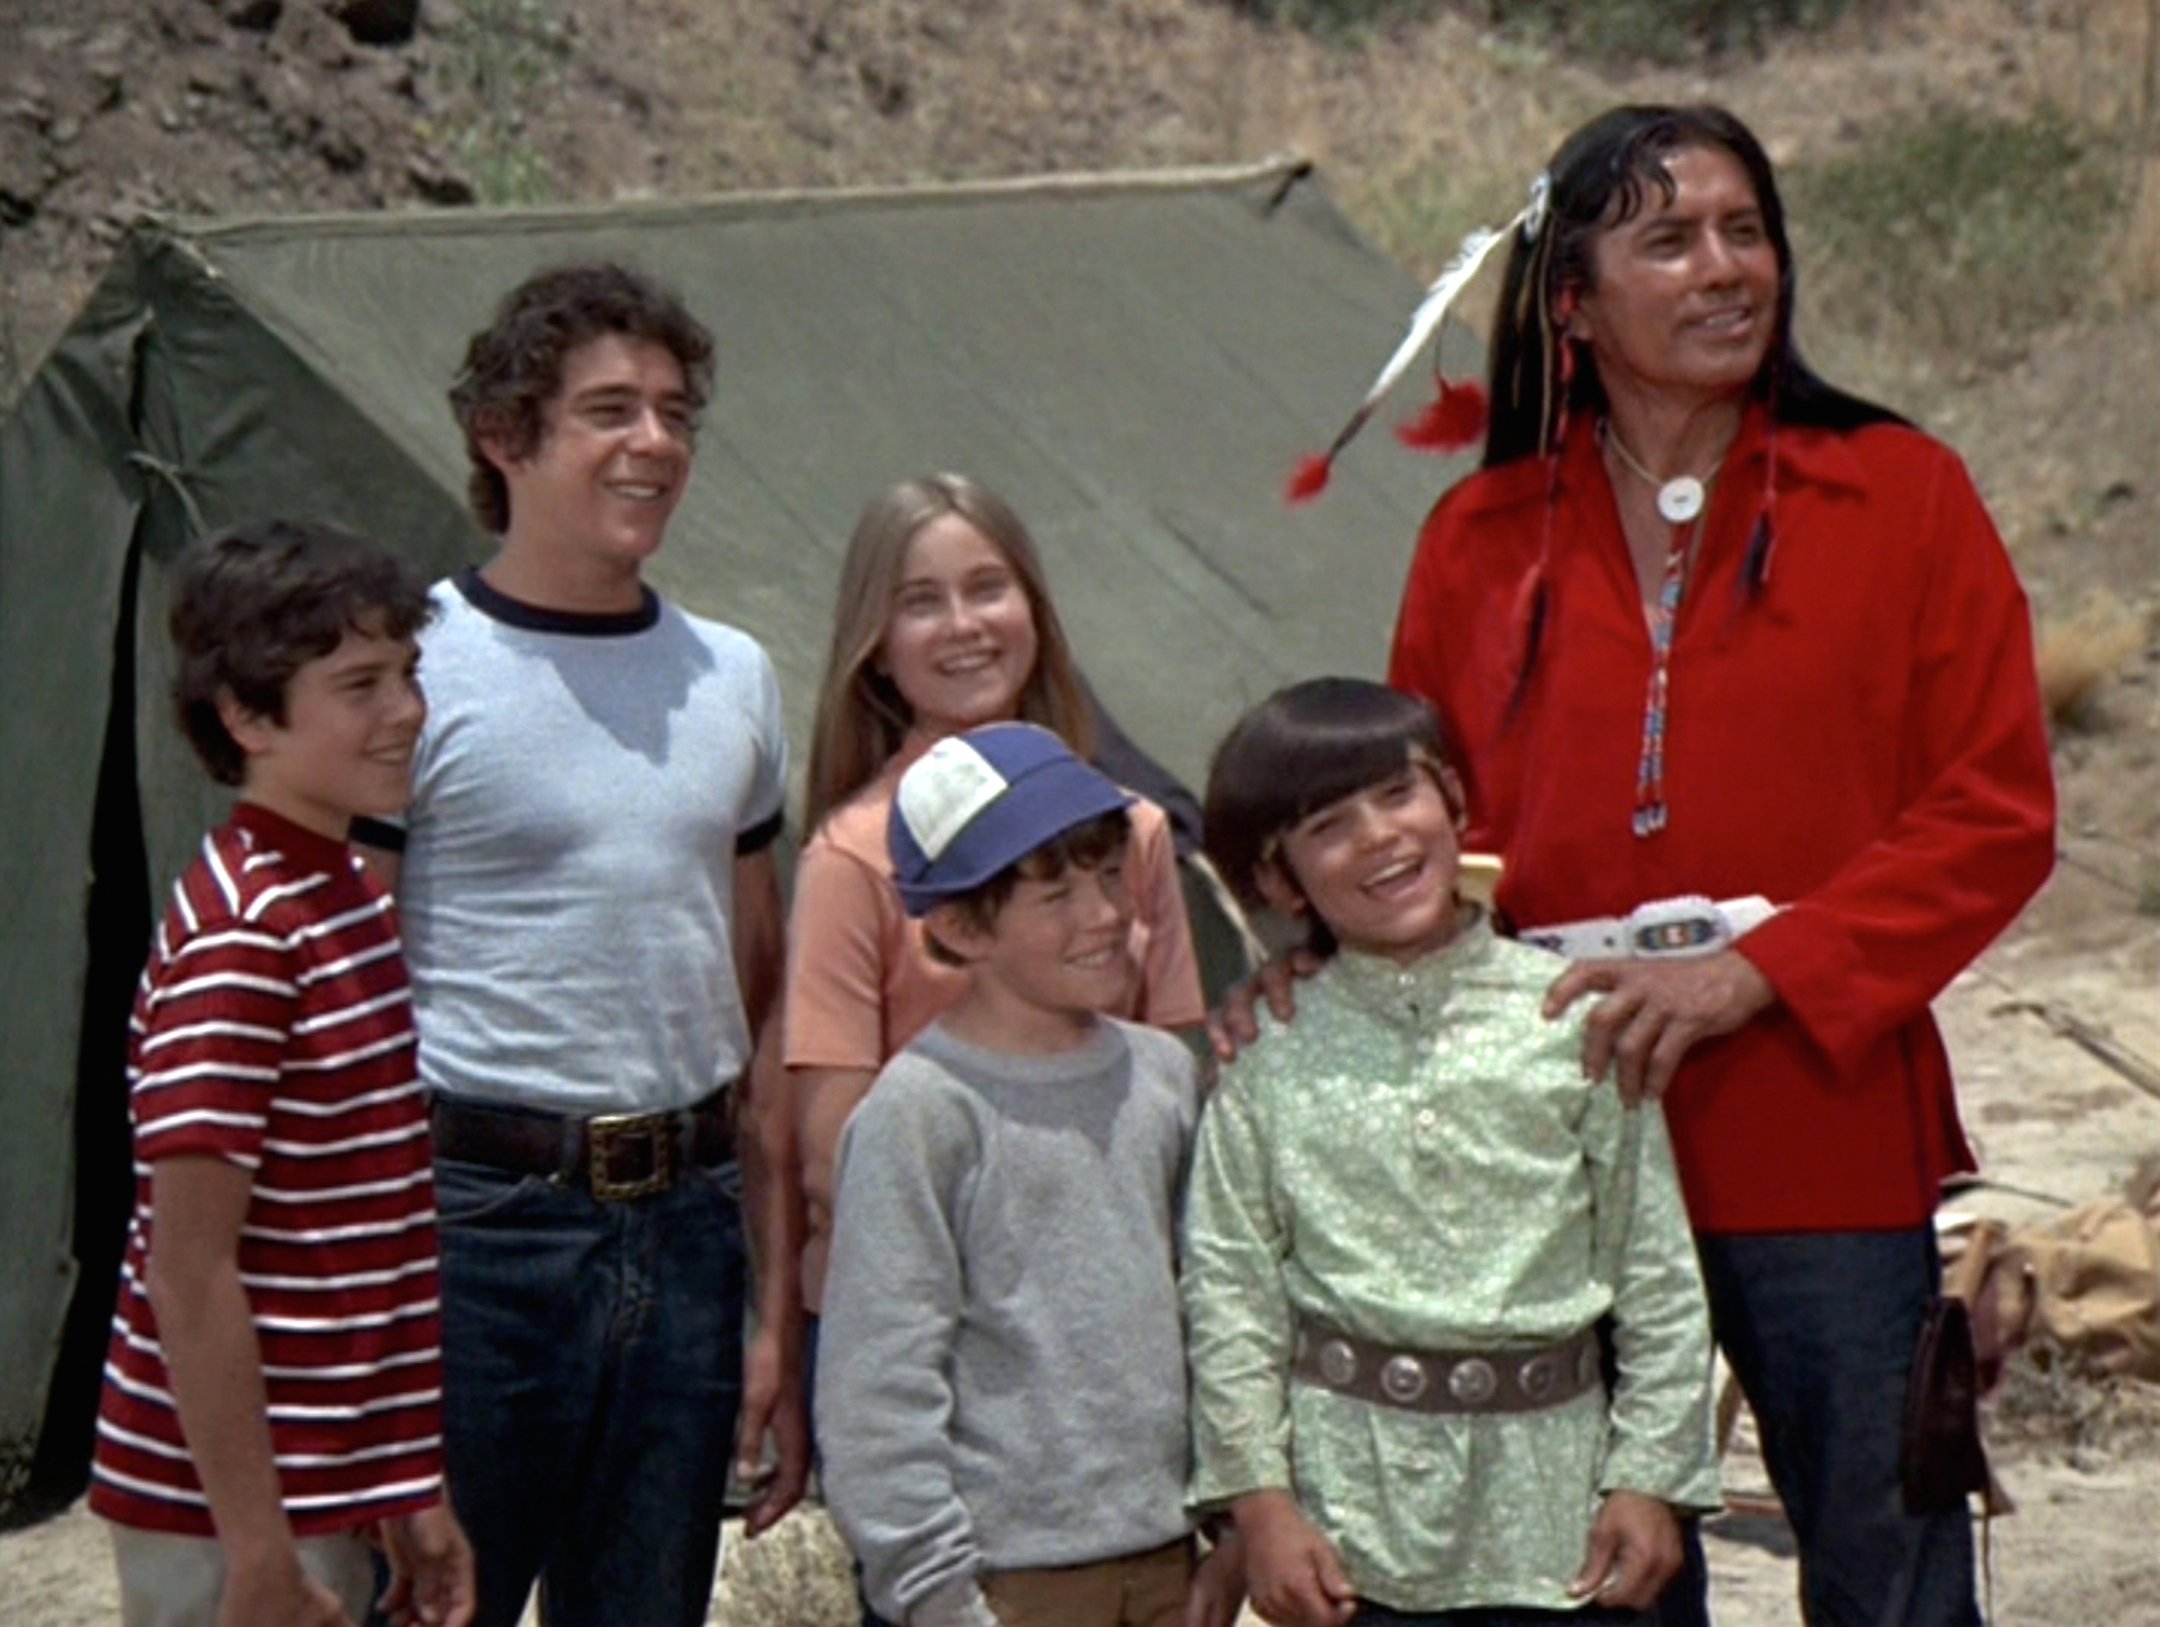 Christopher Knight as Peter Brady, Barry Williams as Greg Brady, Maureen McCormick as Marcia Brady, Mike Lookinland as Bobby Brady, Michele Campo as Jimmy, and Jay Silverheels as Chief Eagle Cloud in 'The Brady Bunch' 